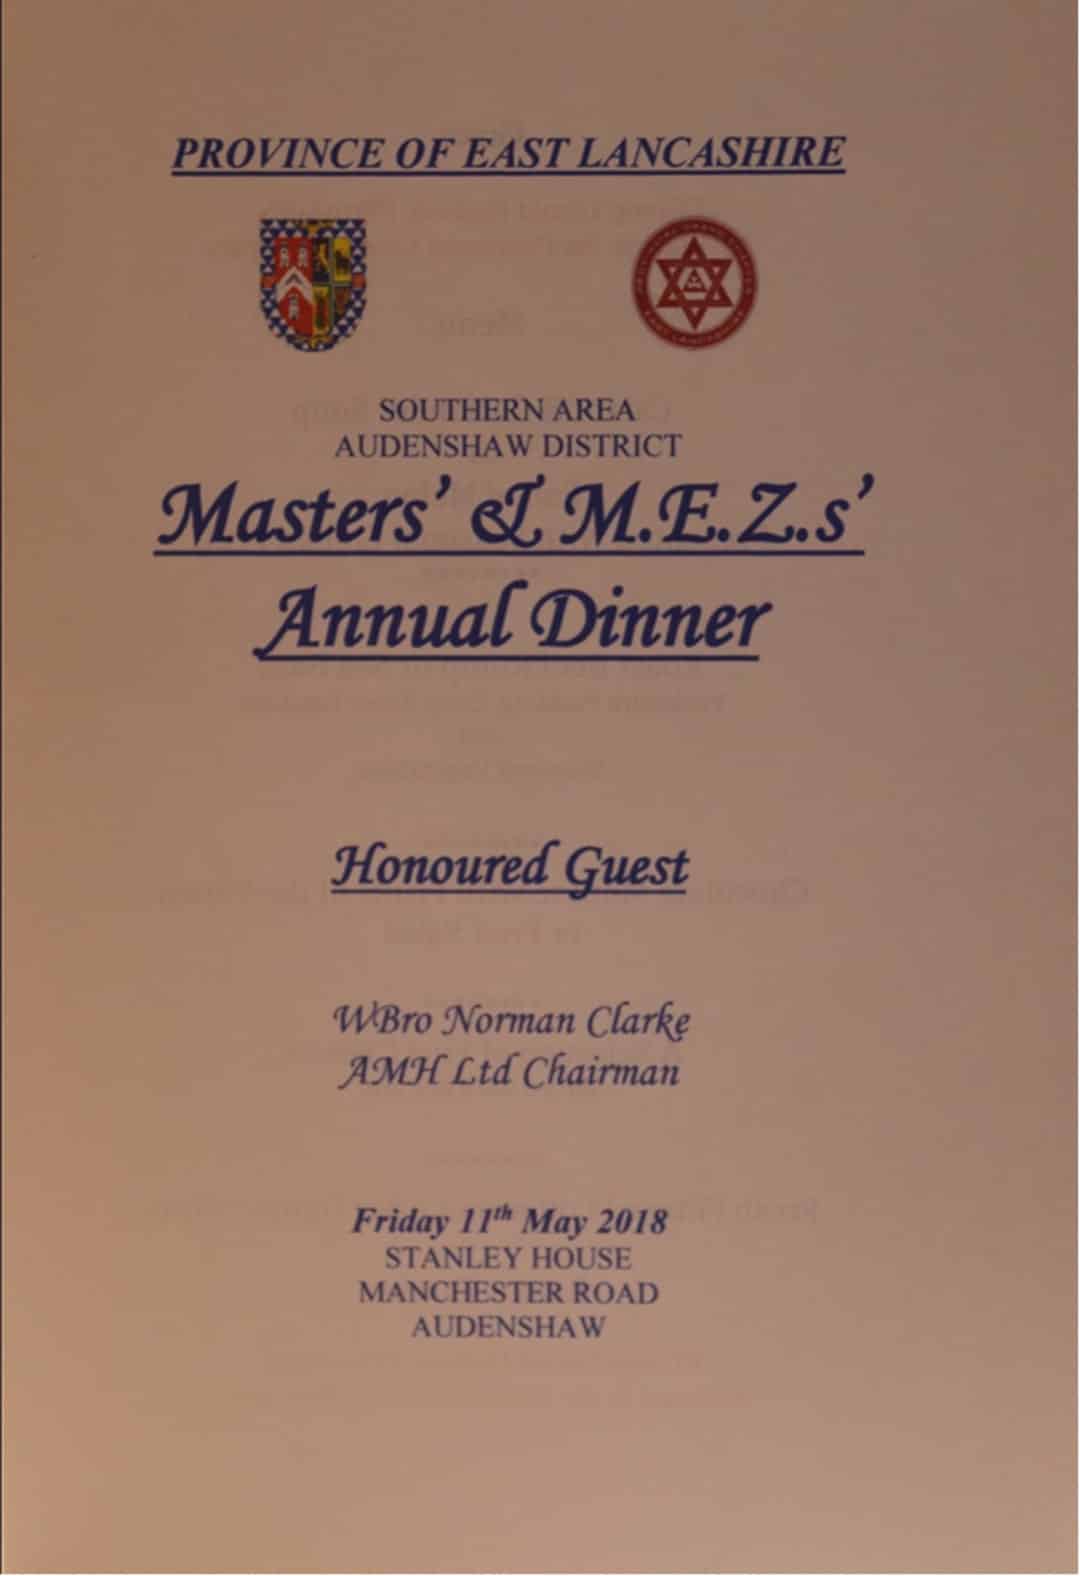 The Audenshaw District Masters’ and First Principals’ Annual Dinner